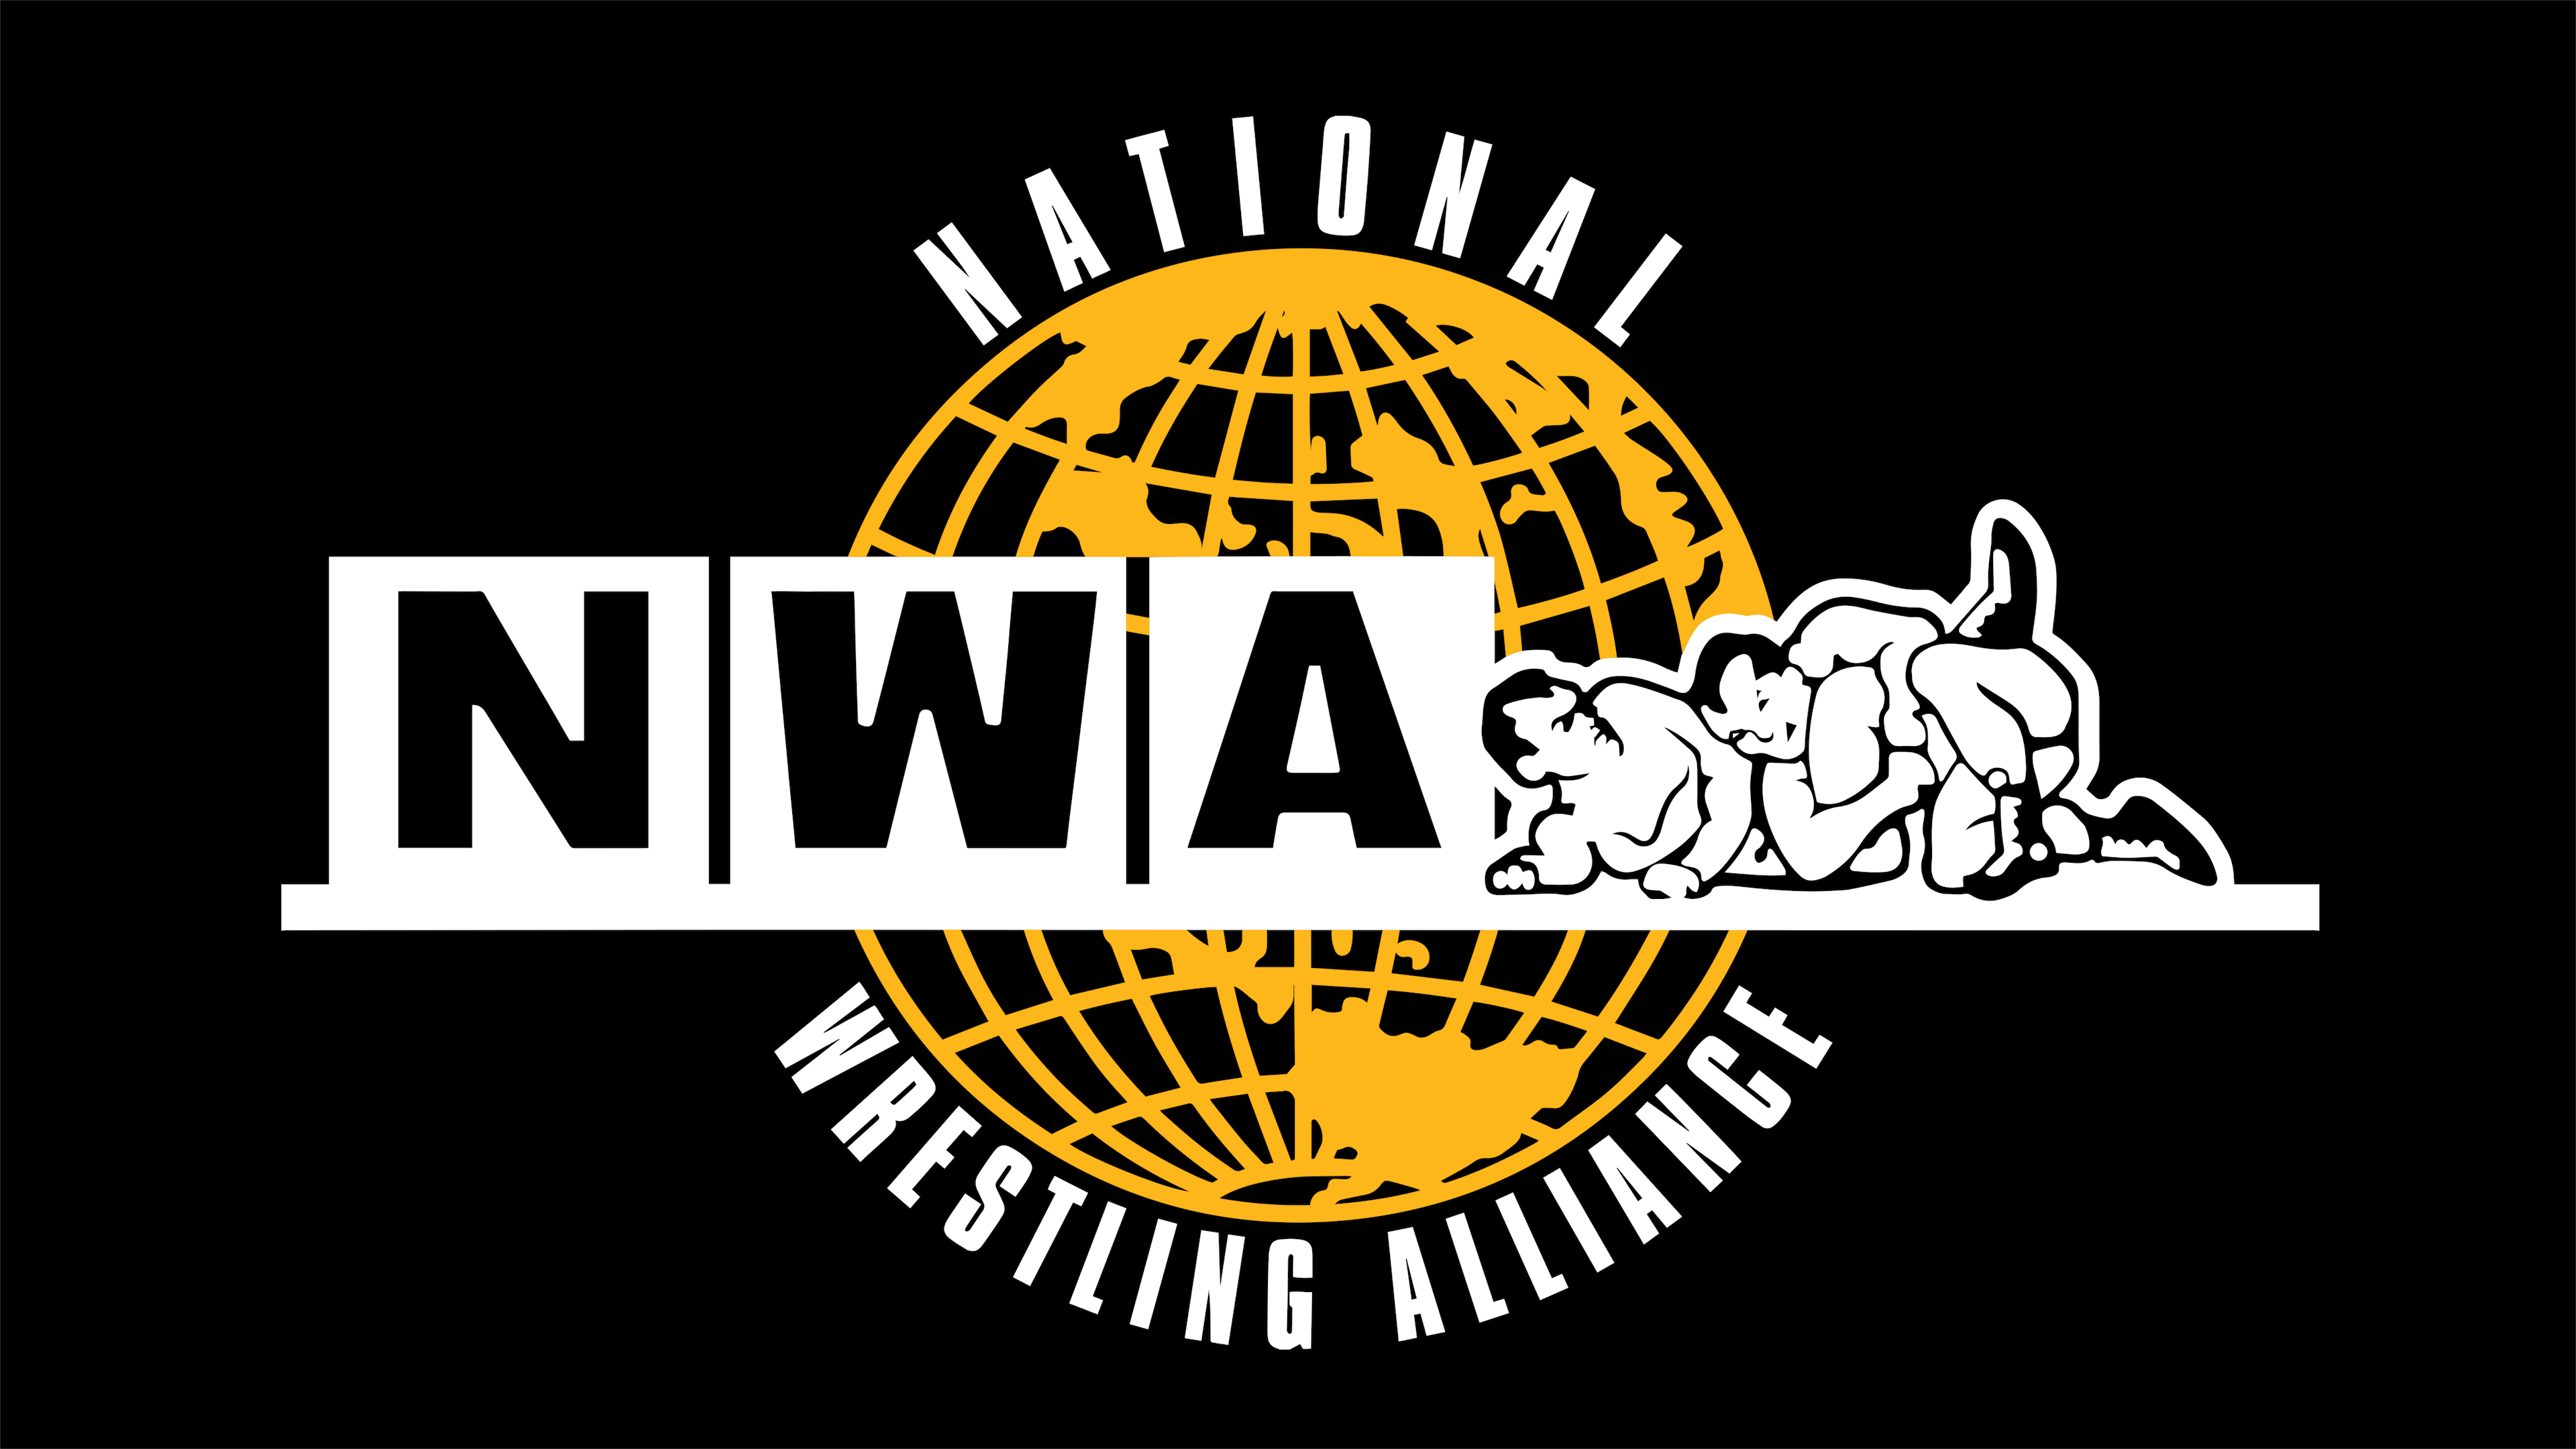 NWA's Halloween Pay-Per-View Event Details Released